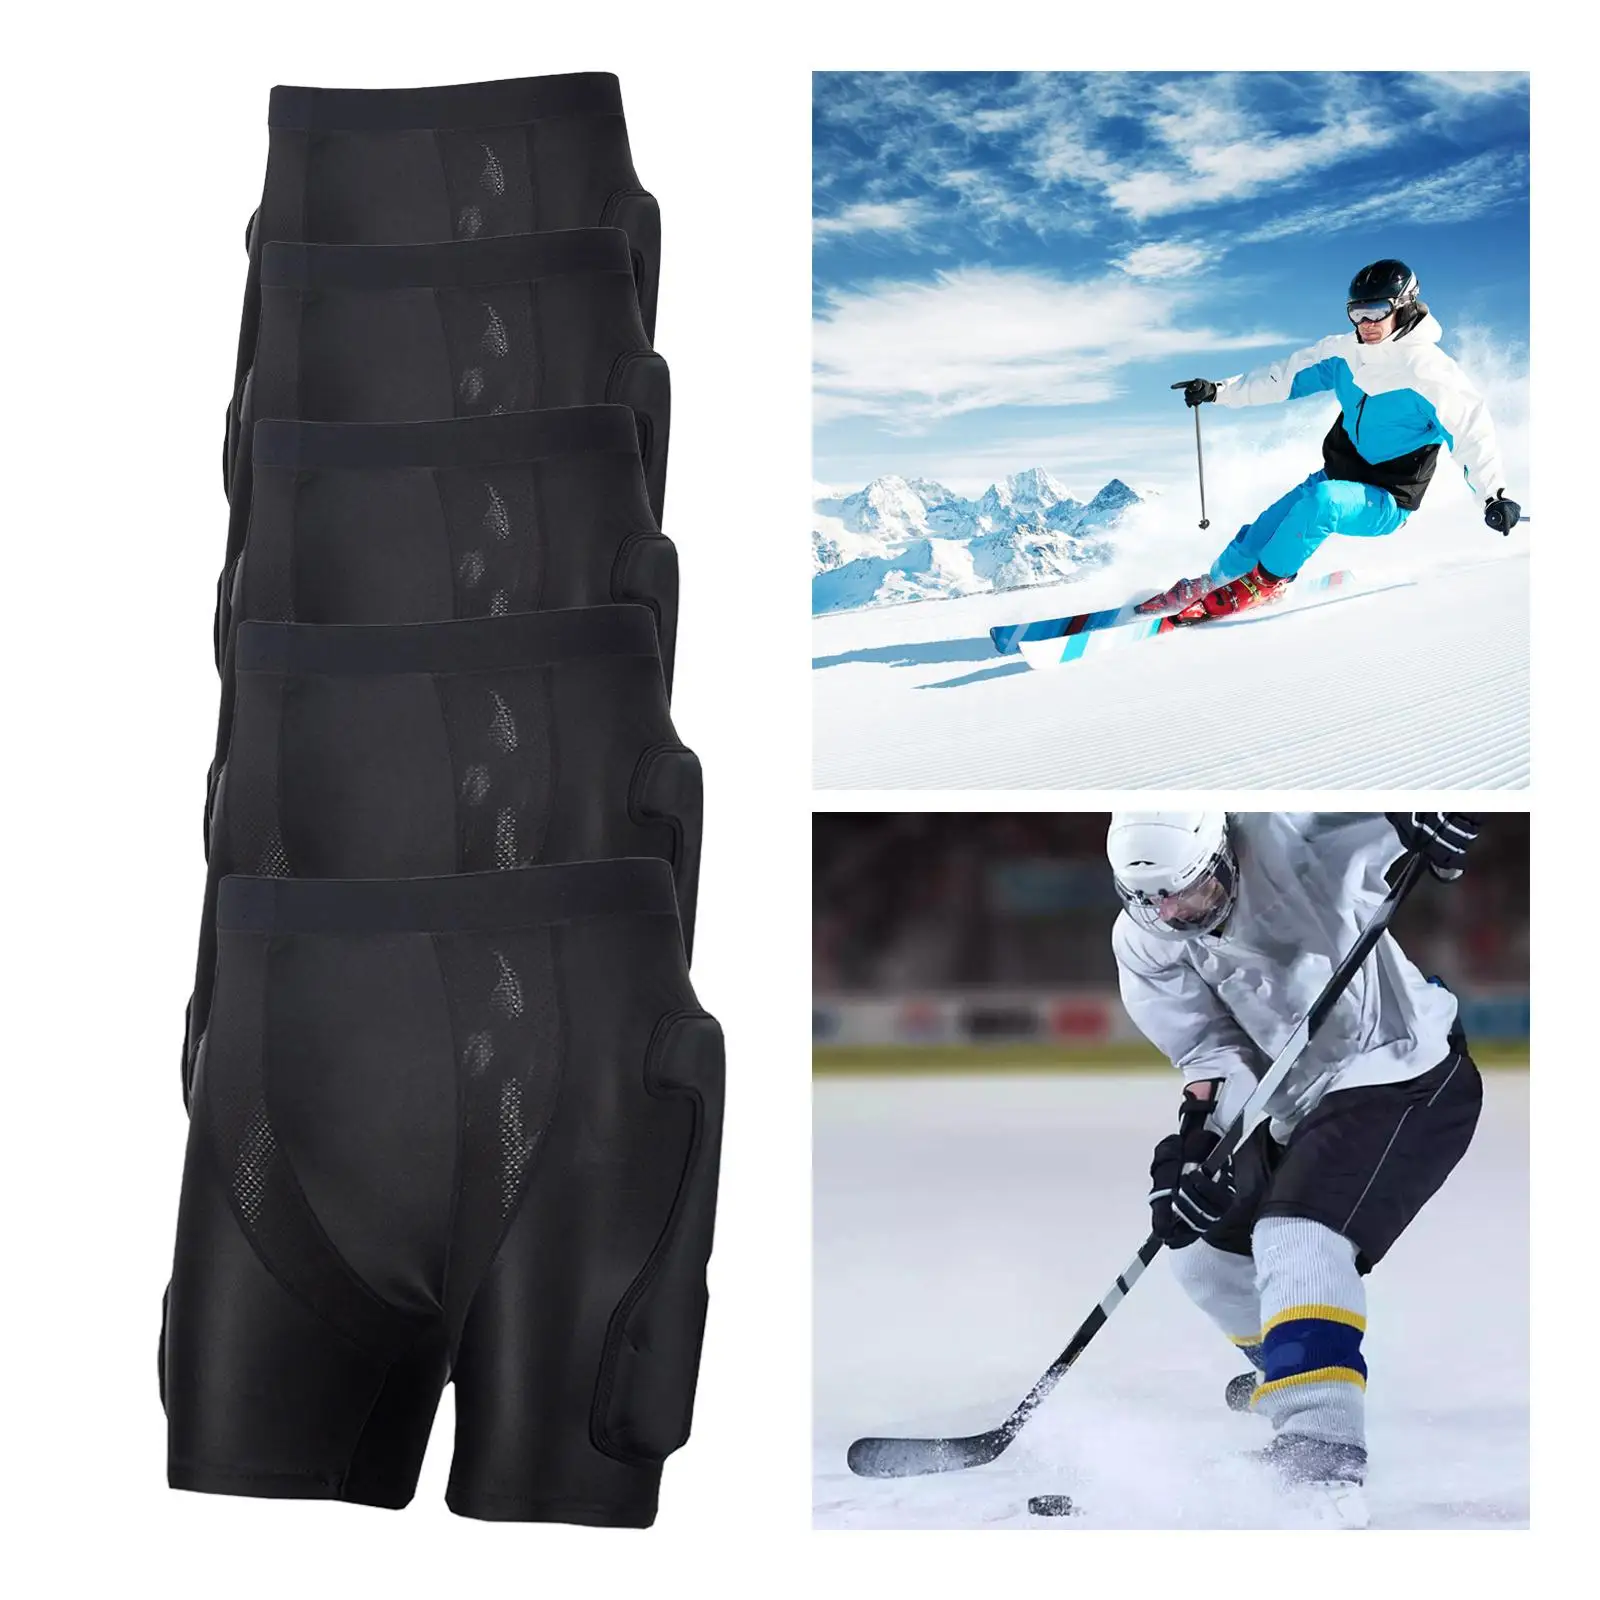 Padded Shorts Skating Butt Pad Hip Protection Impact Resistance 3D Protection for Outdoor Sports Skateboard Ski Skate Snowboard